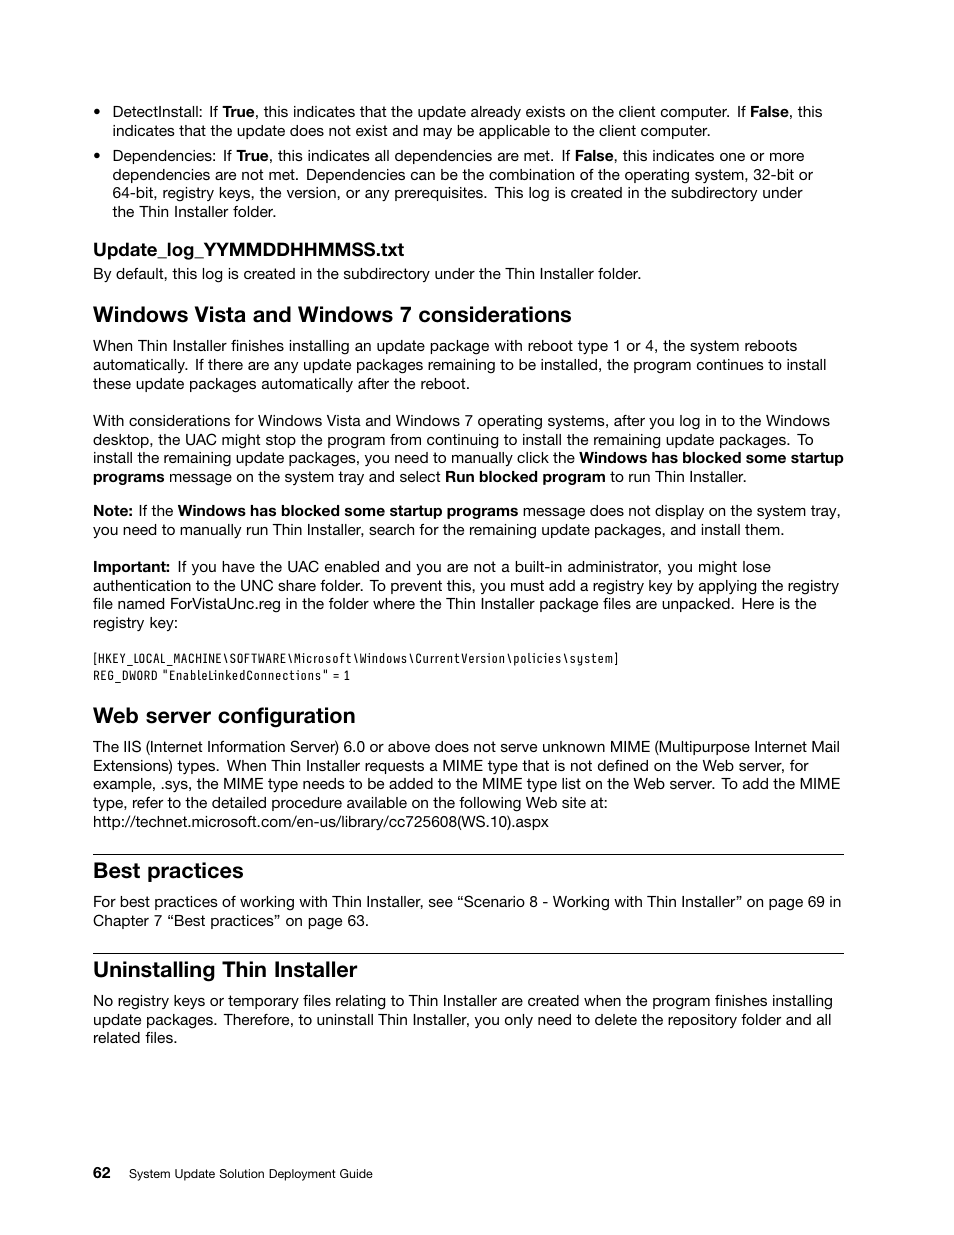 Windows vista and windows 7 considerations, Web server configuration, Best  practices | Lenovo System Update Solution User Manual | Page 68 / 94